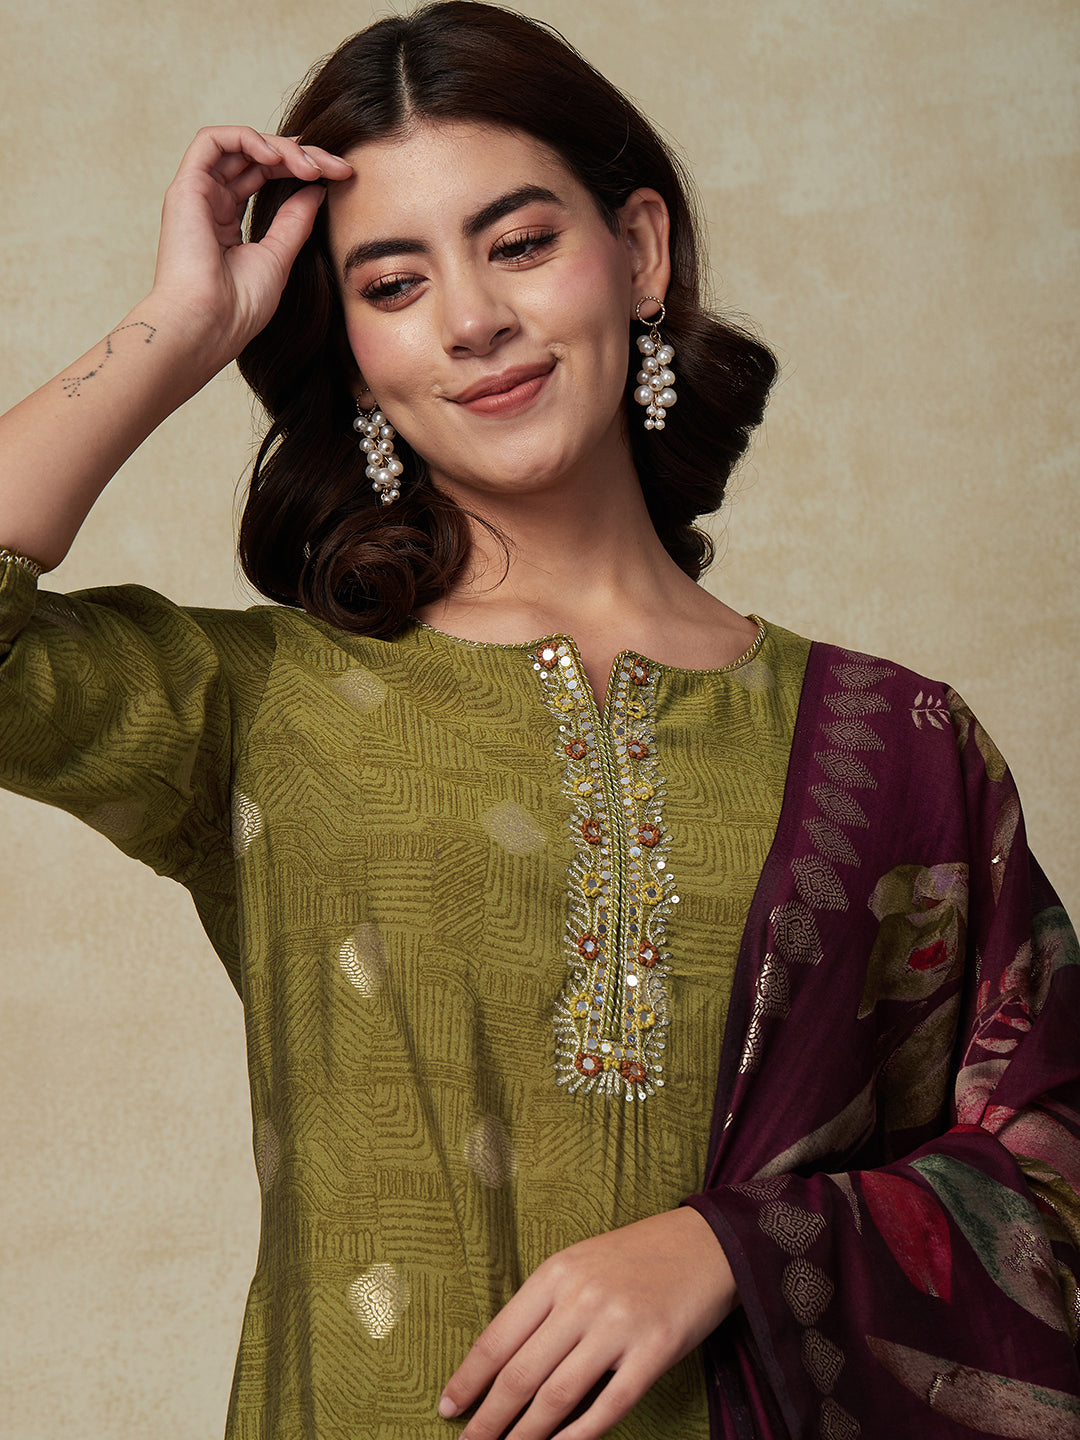 Abstract Printed Mirror & Zari Embroidered Kurta with Pants & Floral Dupatta - Olive